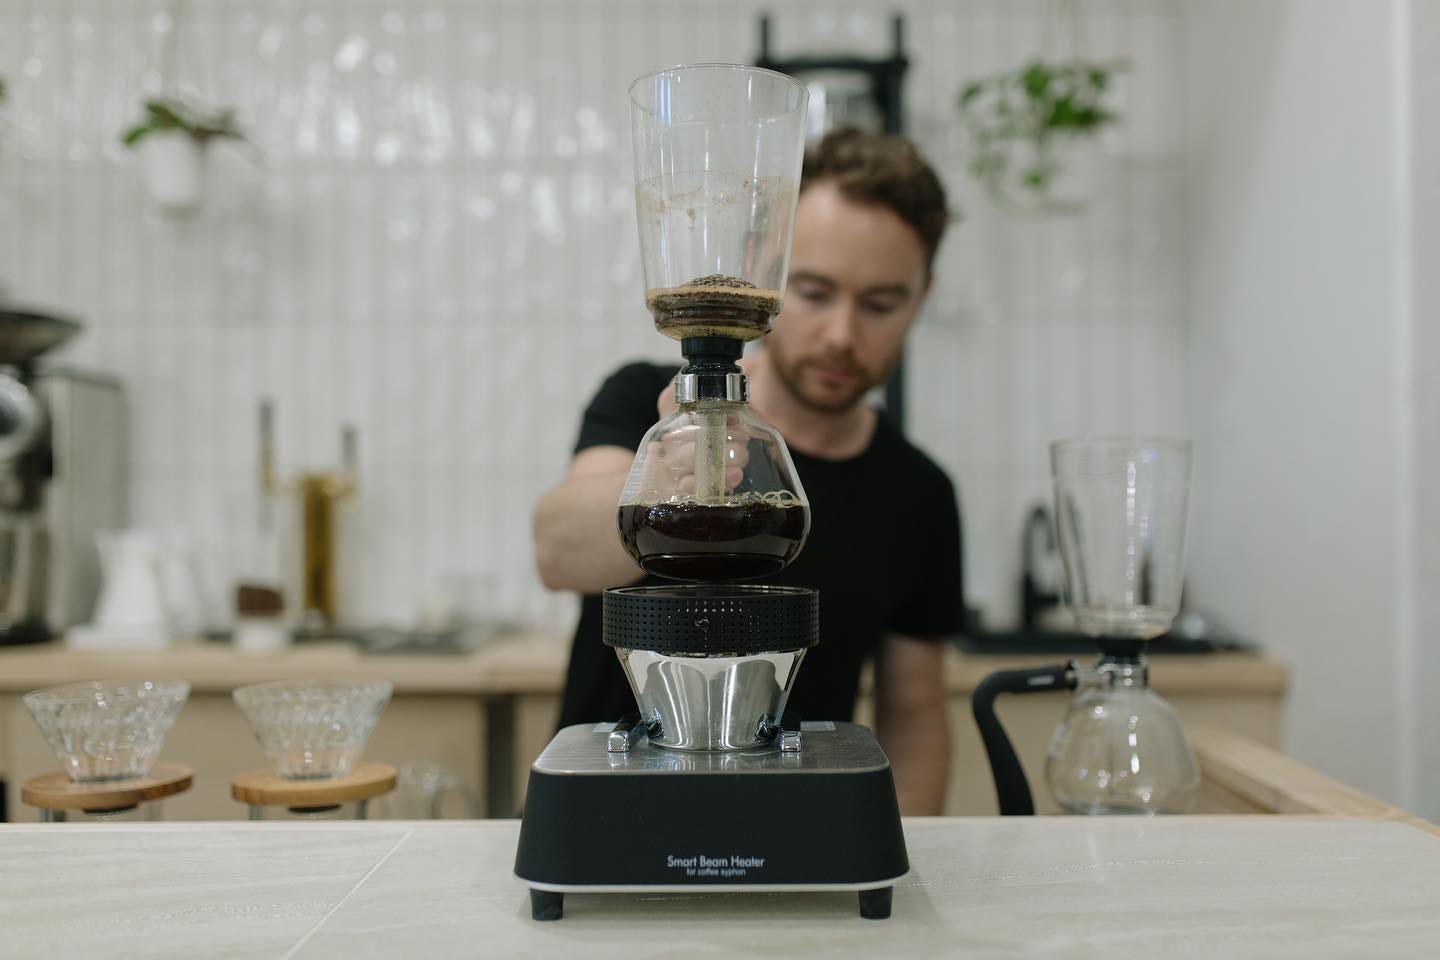 A close-up photo of a siphon coffee brewer in use. A globe half-filled with coffee rests on a black heating device. A tube runs from the globe to an upper glass chamber with the spent coffee grounds. A barista is blurred in the background against a white subway tile wall.